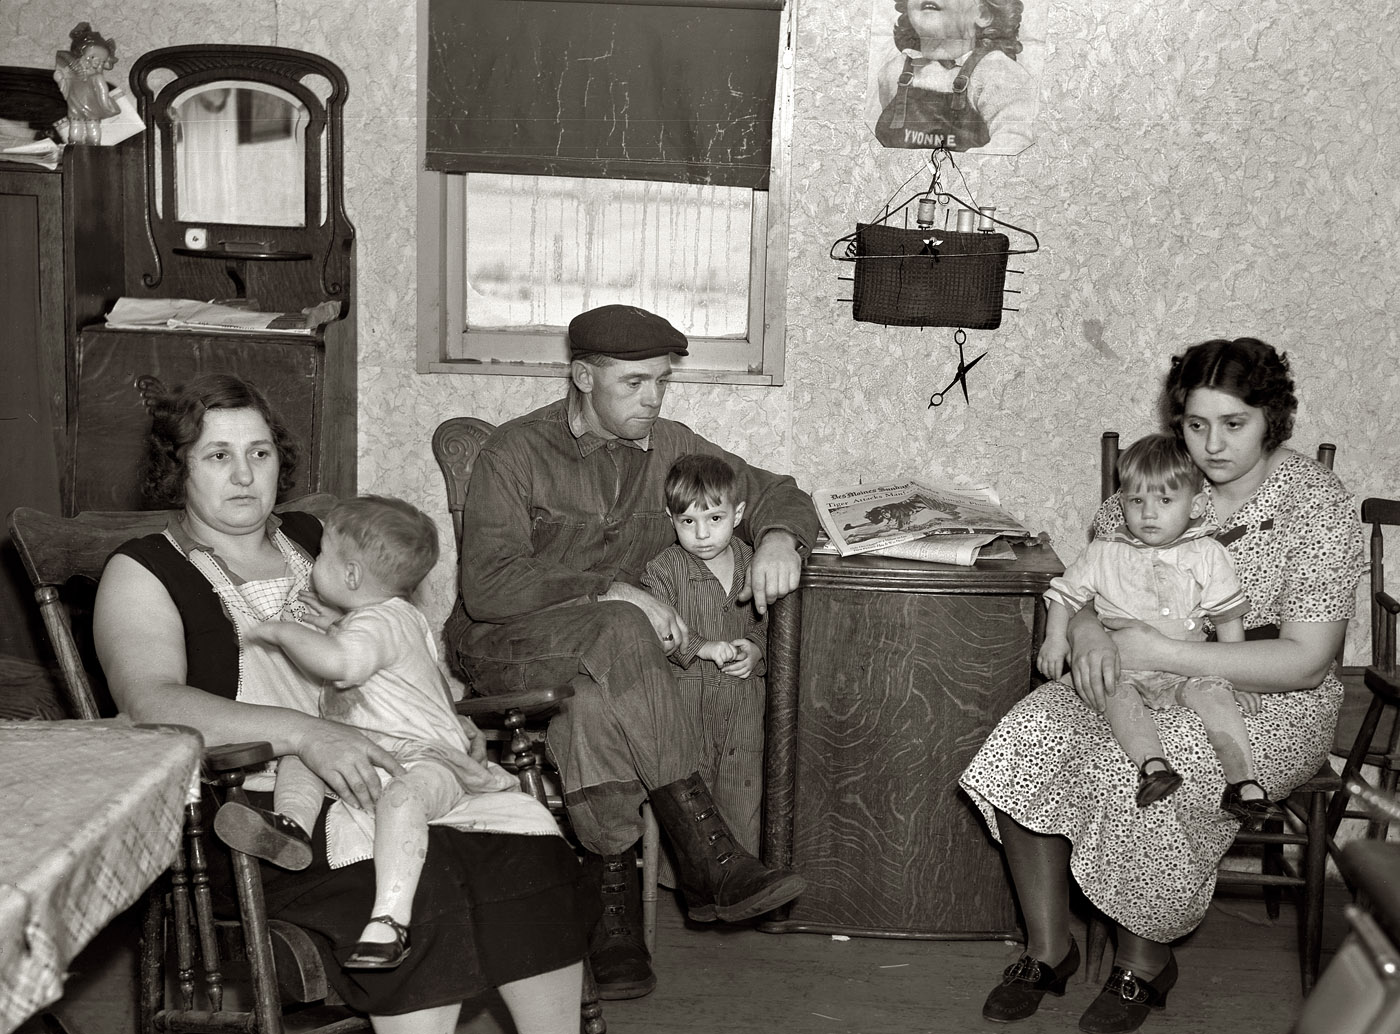 December 1936. Dickens, Iowa. "Part of the L.H. Nissen family of ten living in a three-room shack. Rest of family at school. The whole house was of unusually high humidity. The wife said they could not dry out the bedding because of the poor ventilation. This is the living room and kitchen combined." View full size. Medium format negative by Russell Lee for the Resettlement Administration.